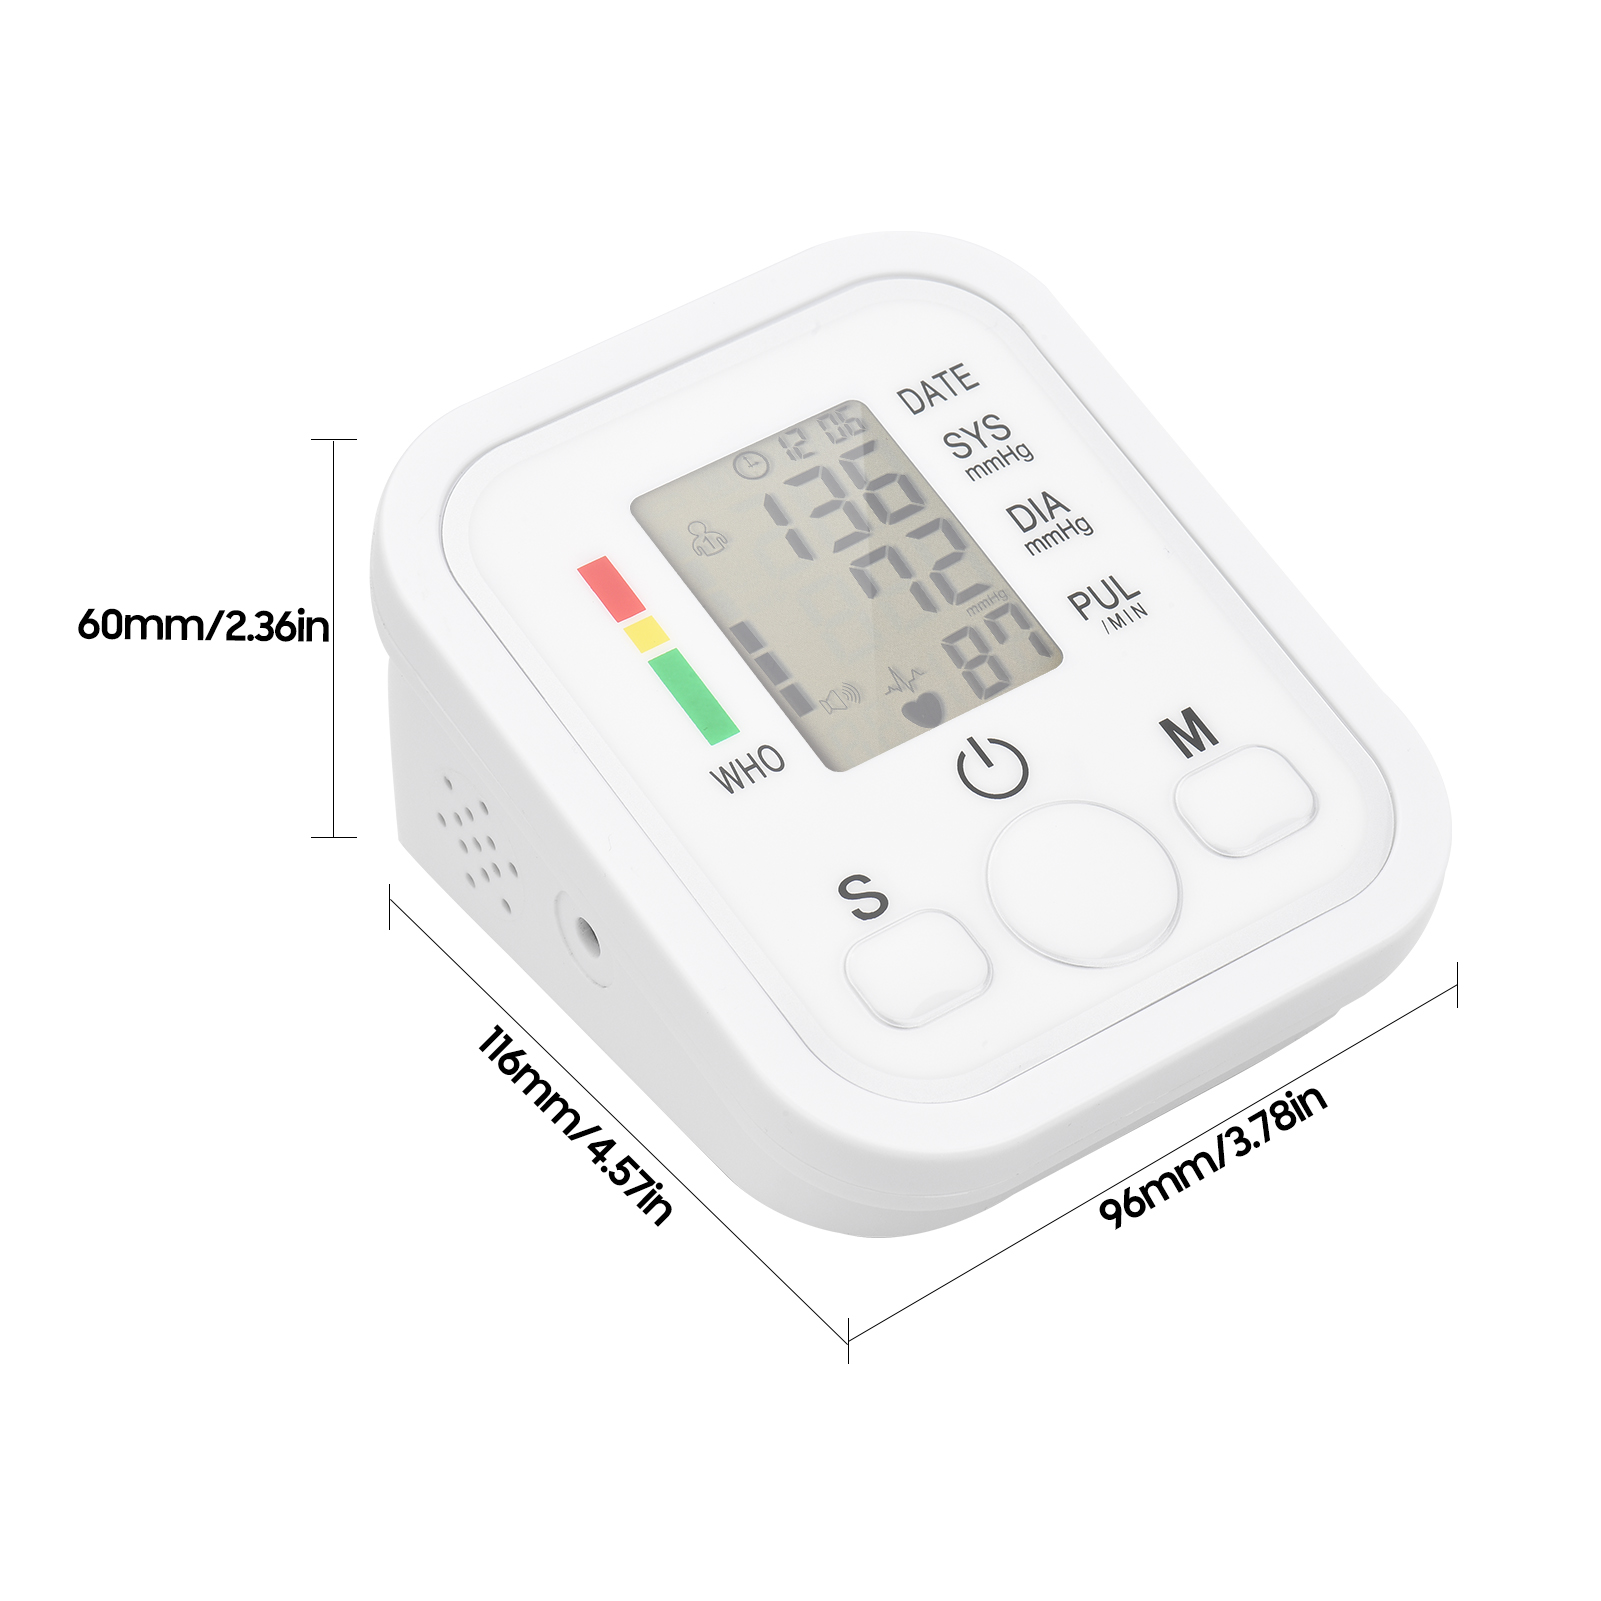 OWSOO 2.0-inch LCD Digital Blood Pressure Meter Electronic Upper Arm Blood Pressure Cuff Household Automatic BP Cuff Blood Pressure Tester Arm Cuff Dual User Mode 99 Groups Memory with English Vo - image 2 of 7